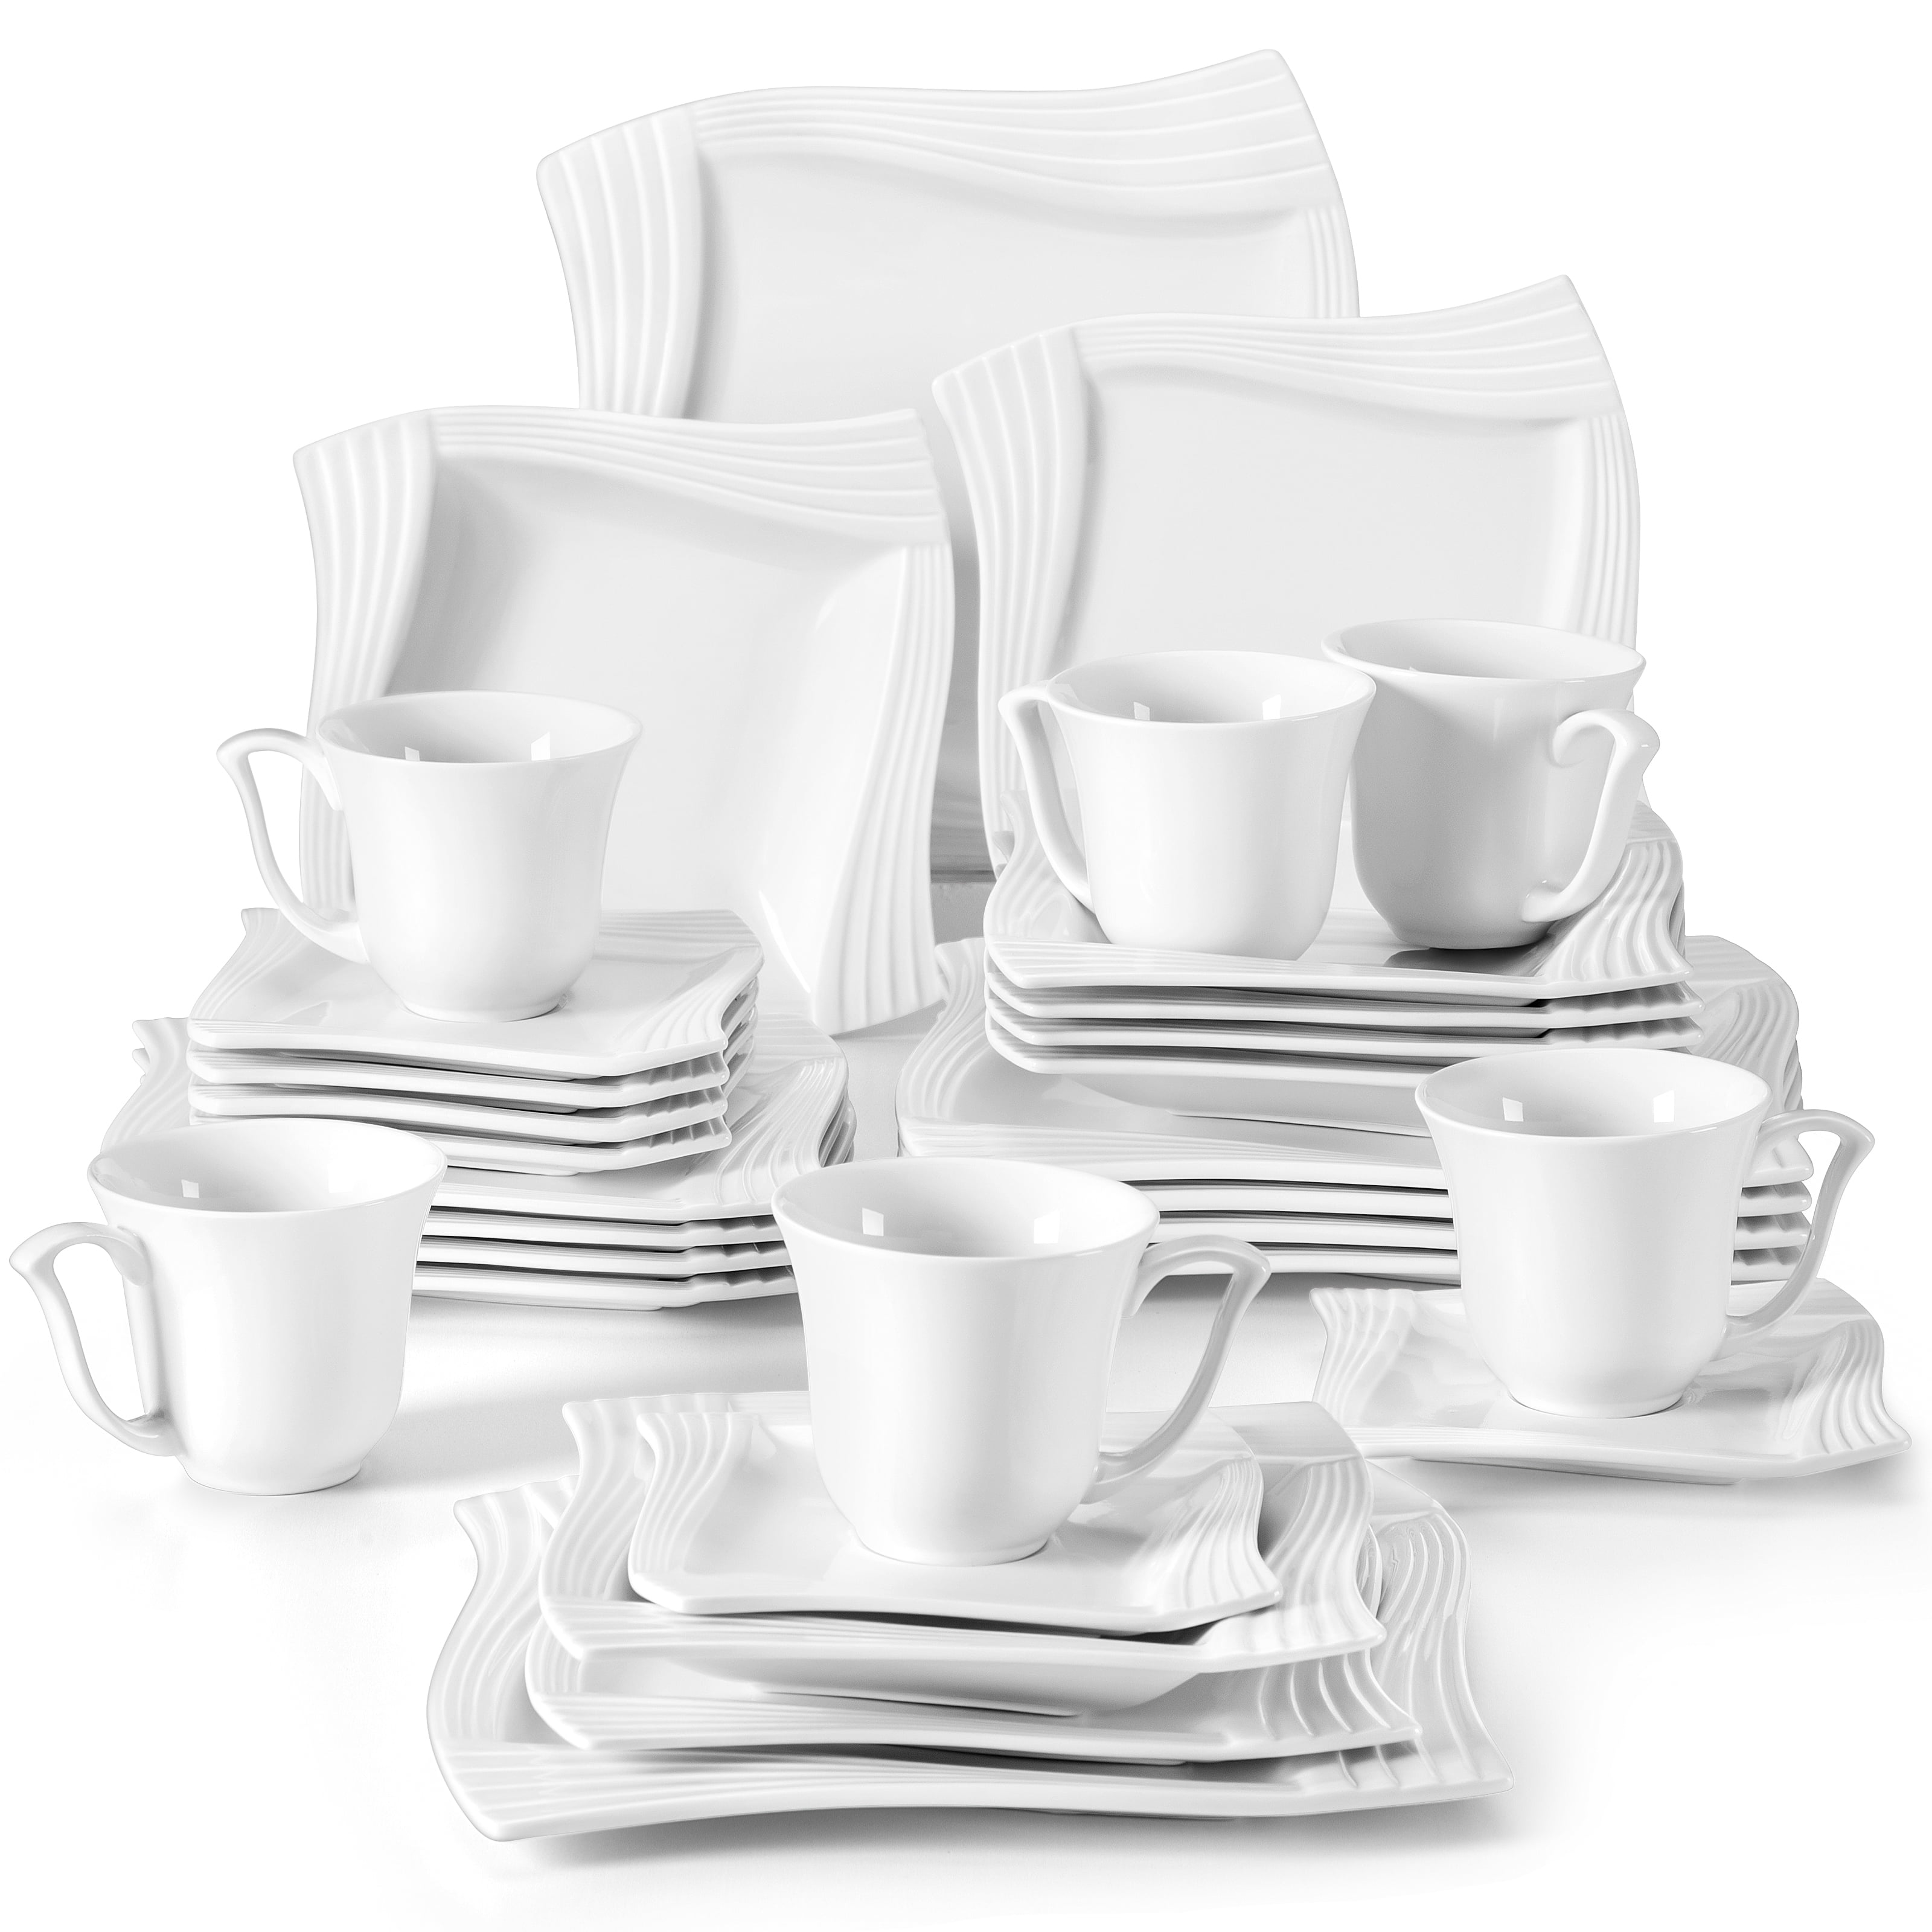 MALACASA 30-Piece Dinner Set Ivory White Porcelain Tableware Set with 6 Dinner Plates/Dessert Plates/Soup Plates/Cups/Saucers Series Amparo Service for 6 